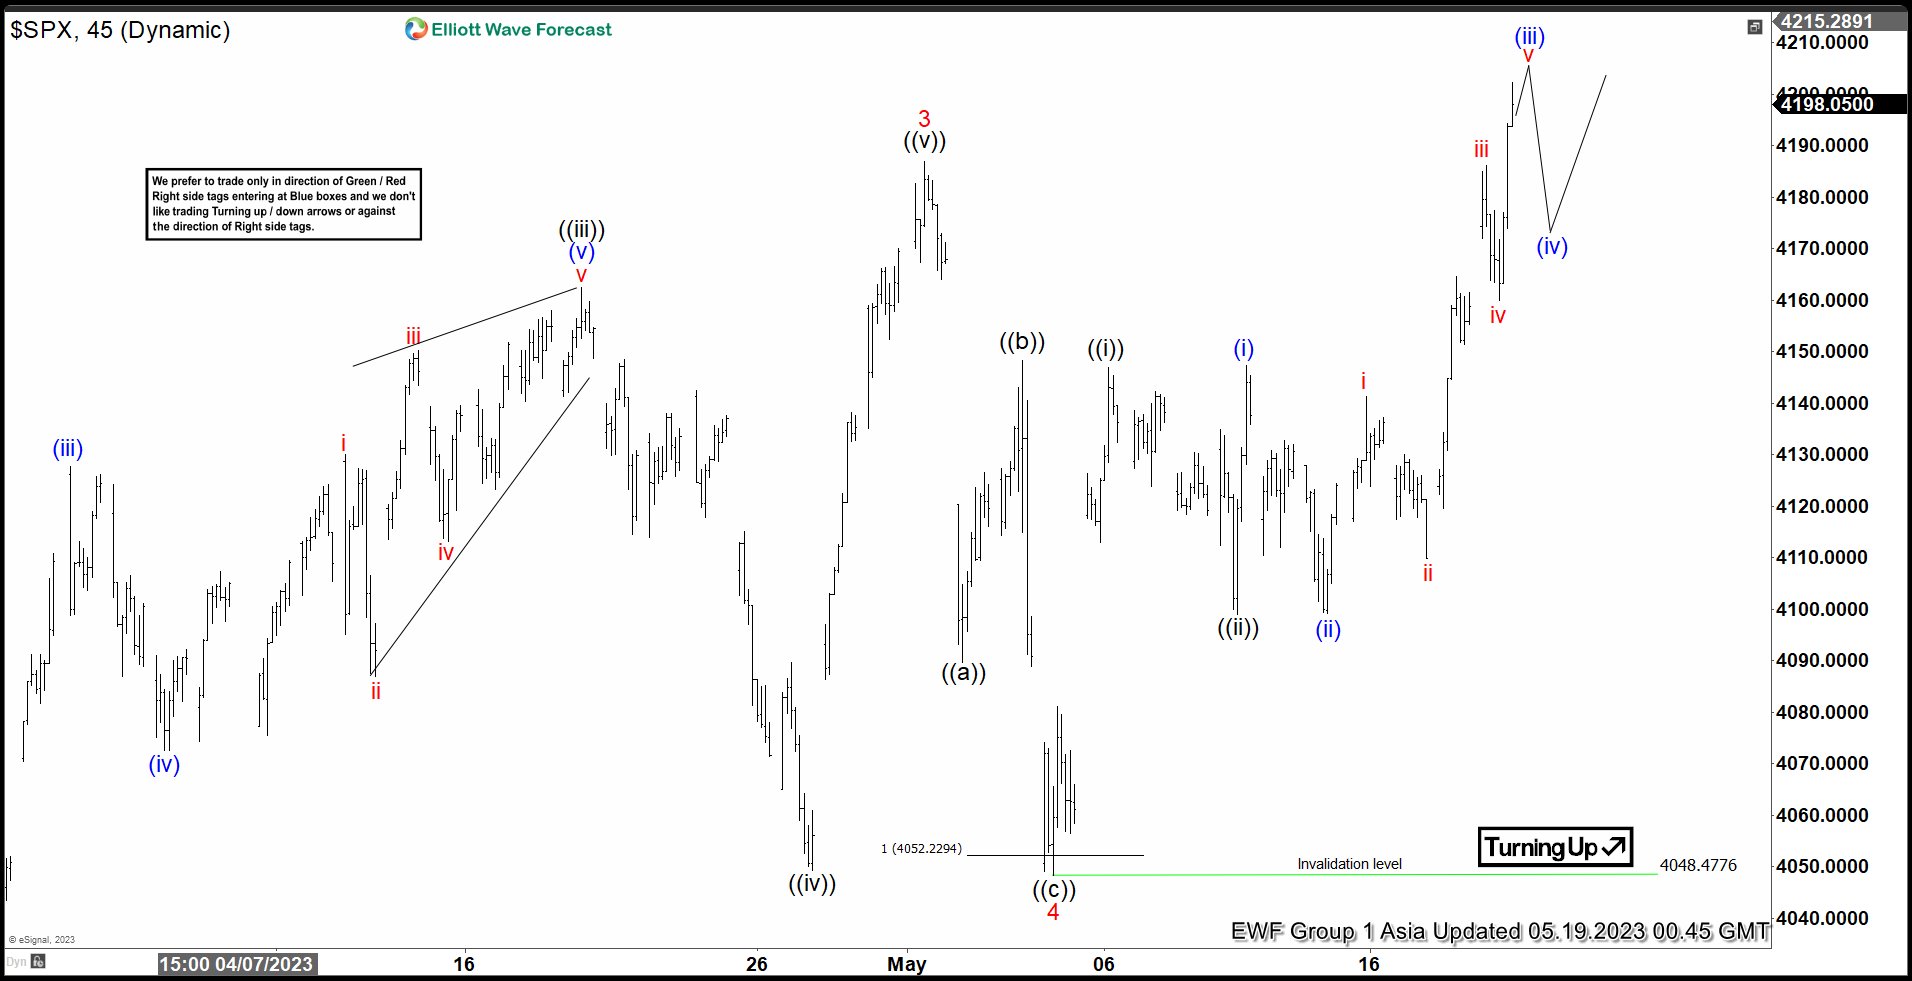 Elliott Wave View: S&P 500 (SPX) Has Started Wave 5 Higher